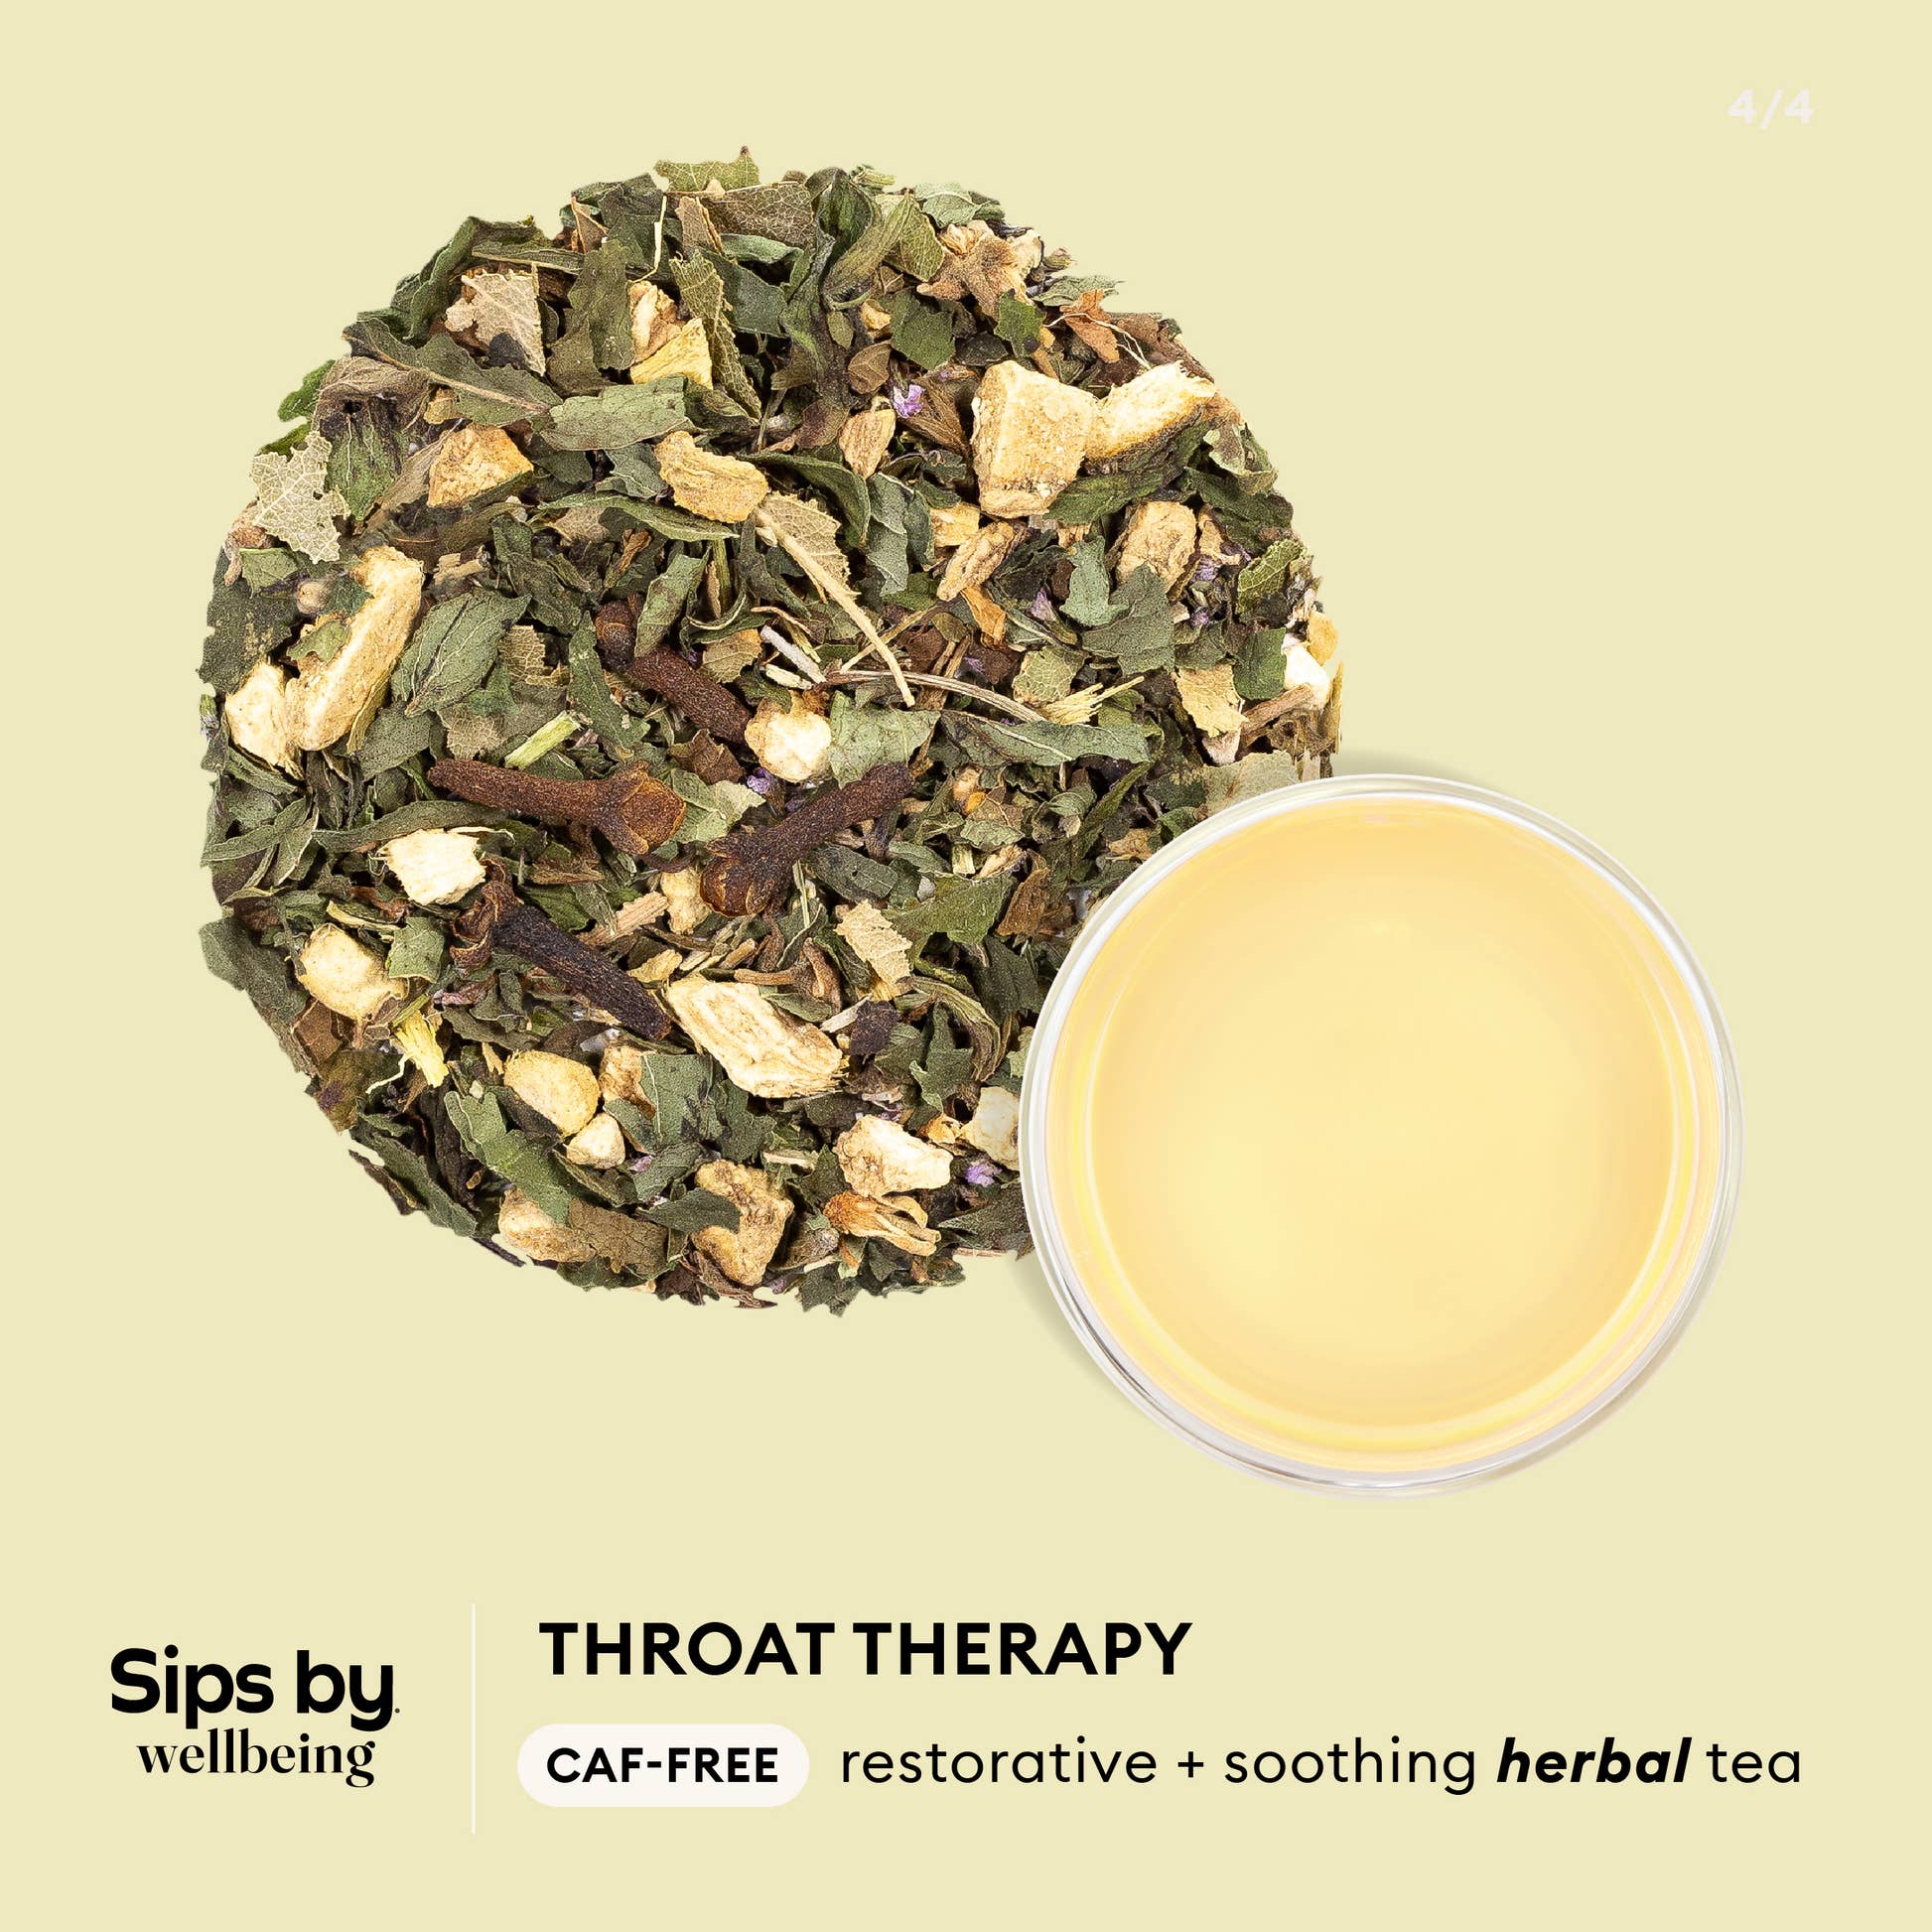 Sips by Wellbeing - Throat Therapy caf-free, restorative + soothing infographic